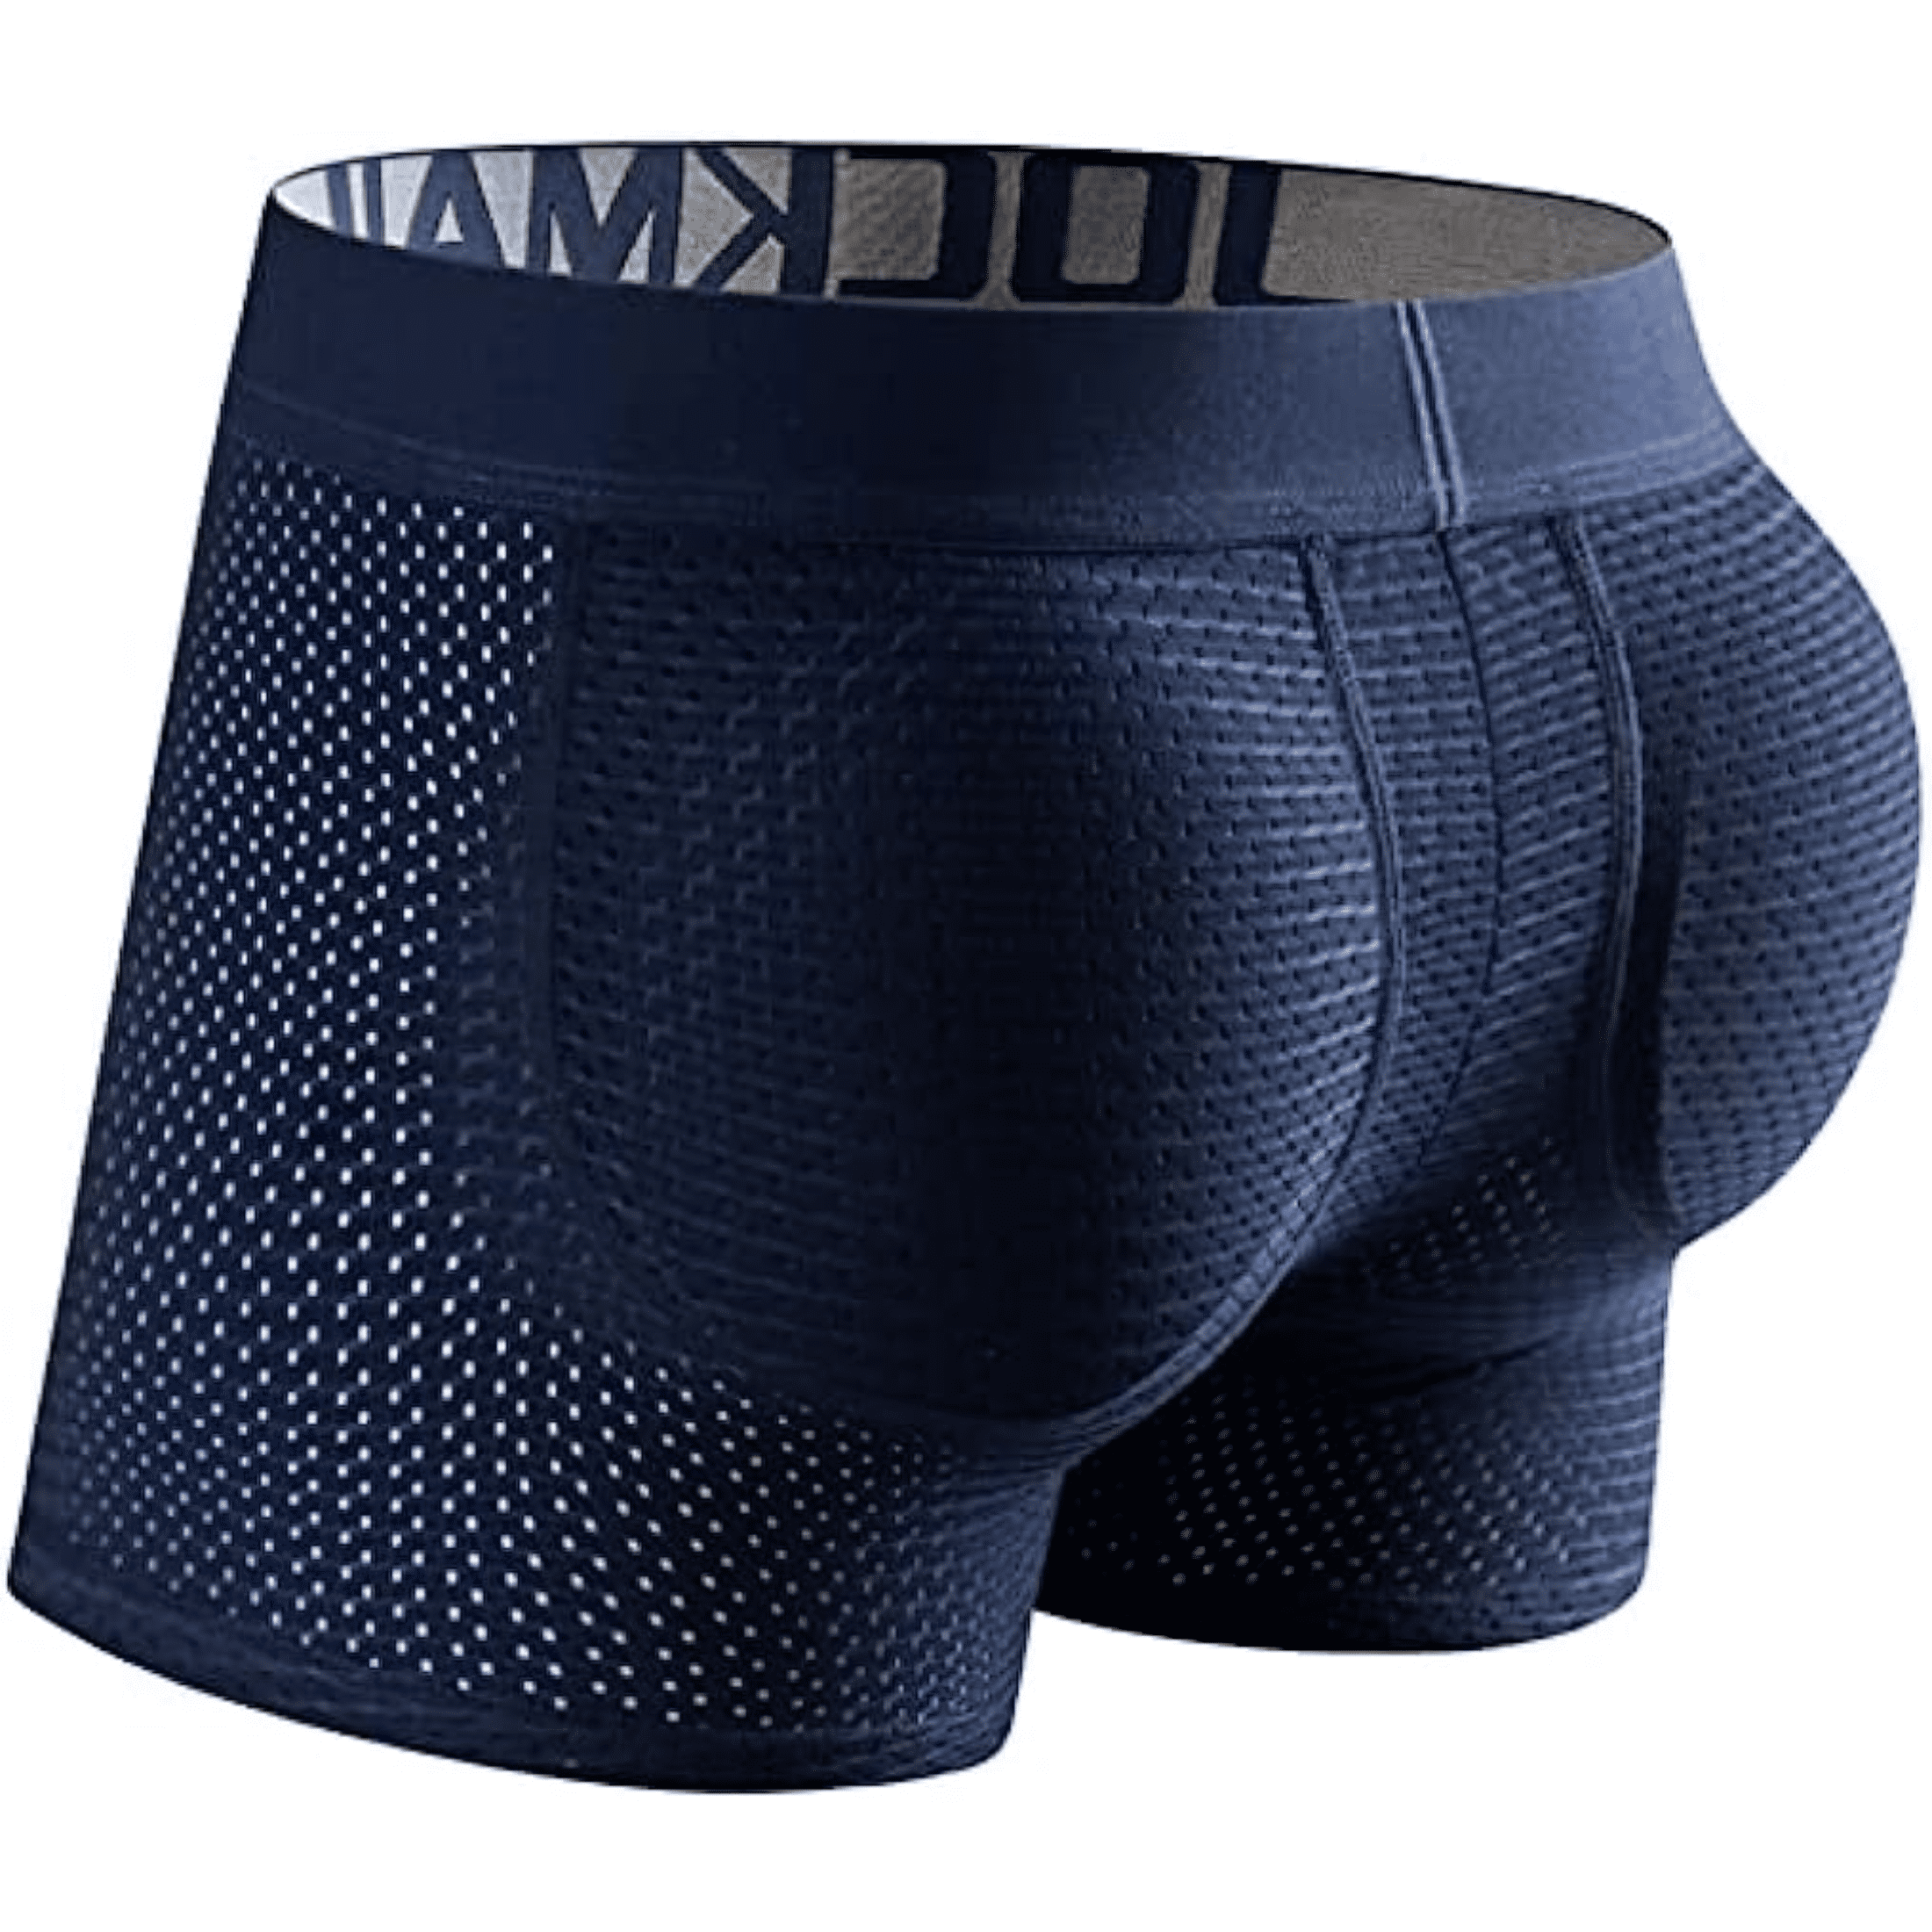 TESOON Mesh Mens Underwear Padded Short Removable Pad Front and Back ...